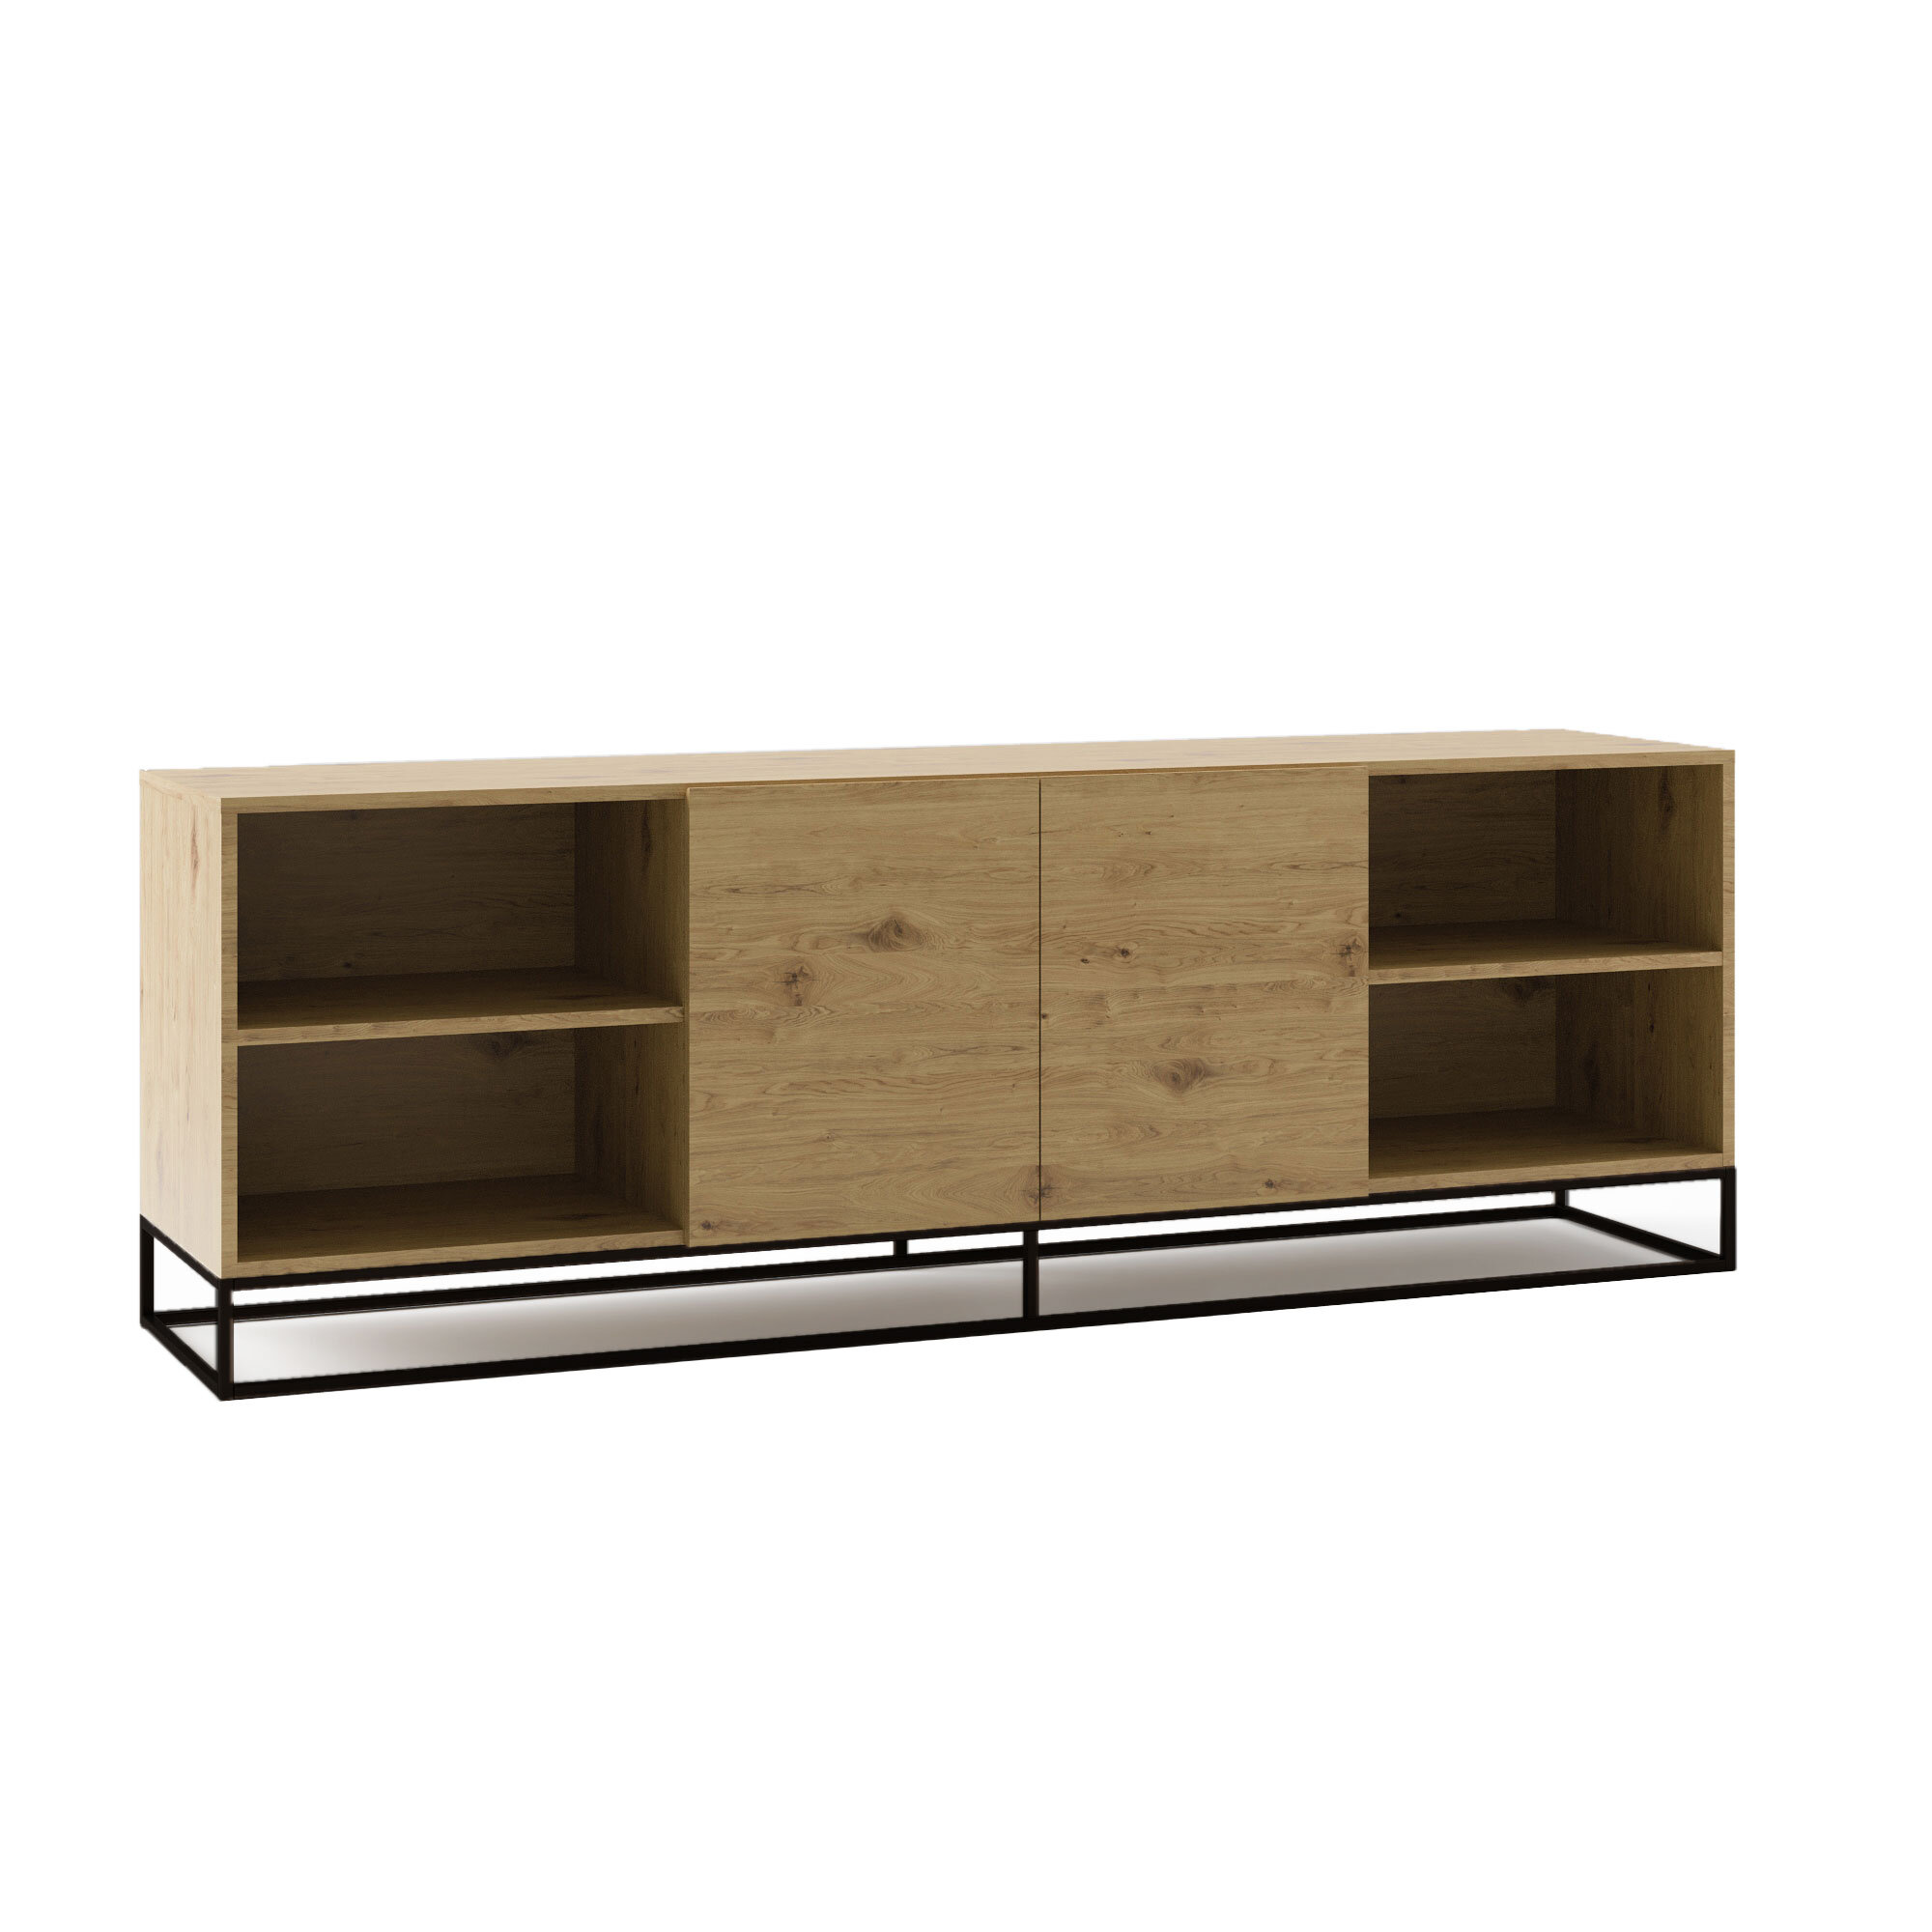 Greenpoint End Credenza